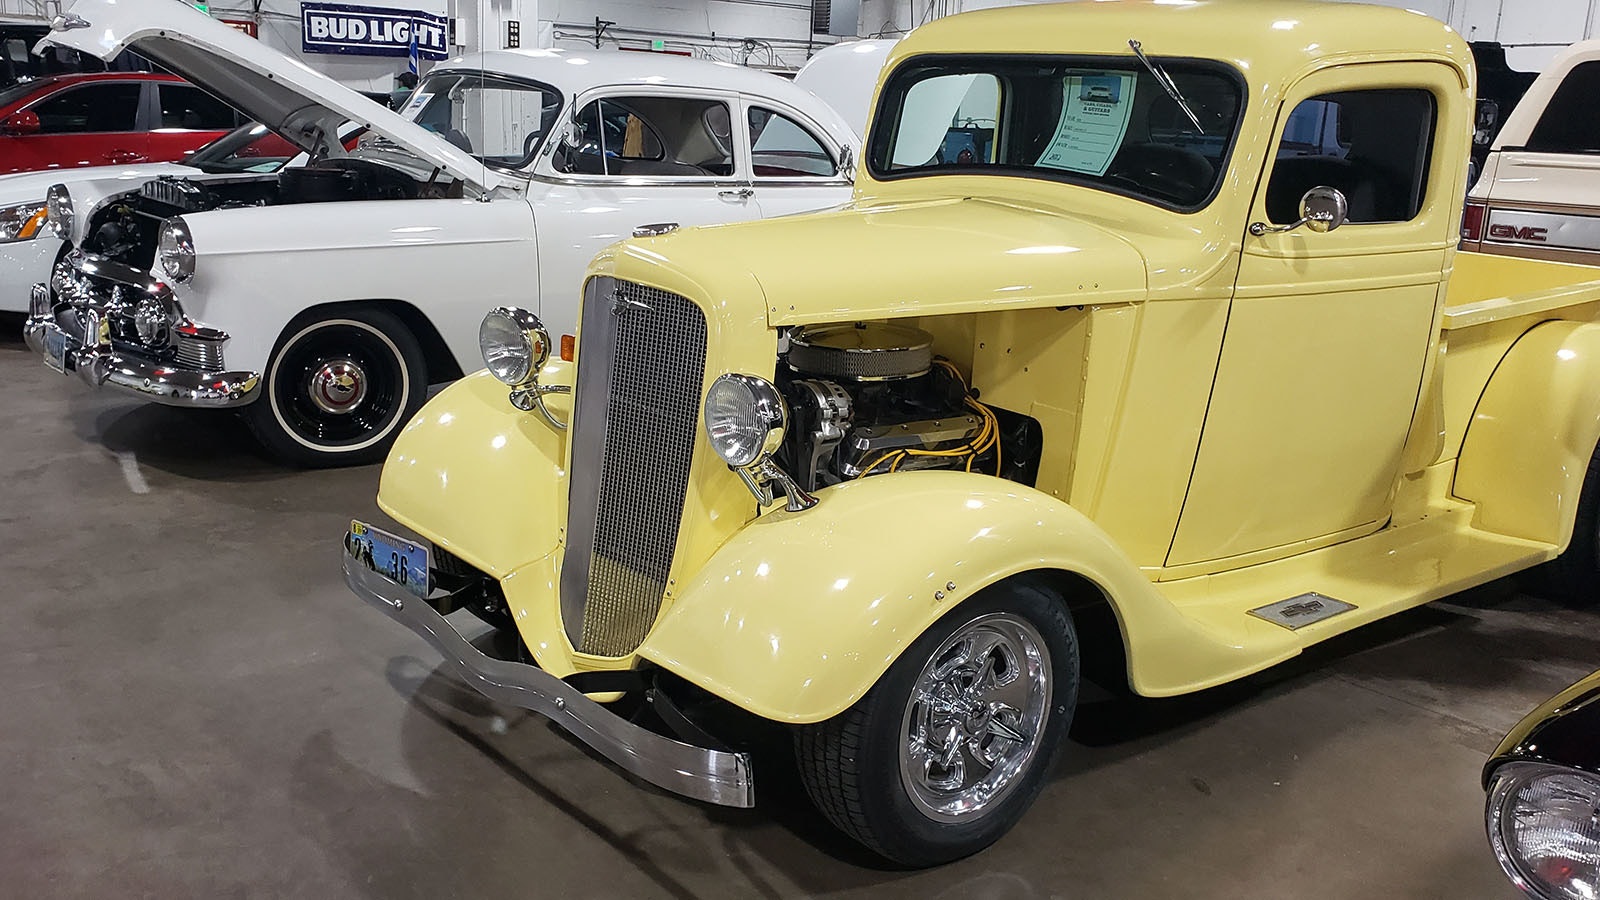 A 1936 Chevy truck with the engine showing.